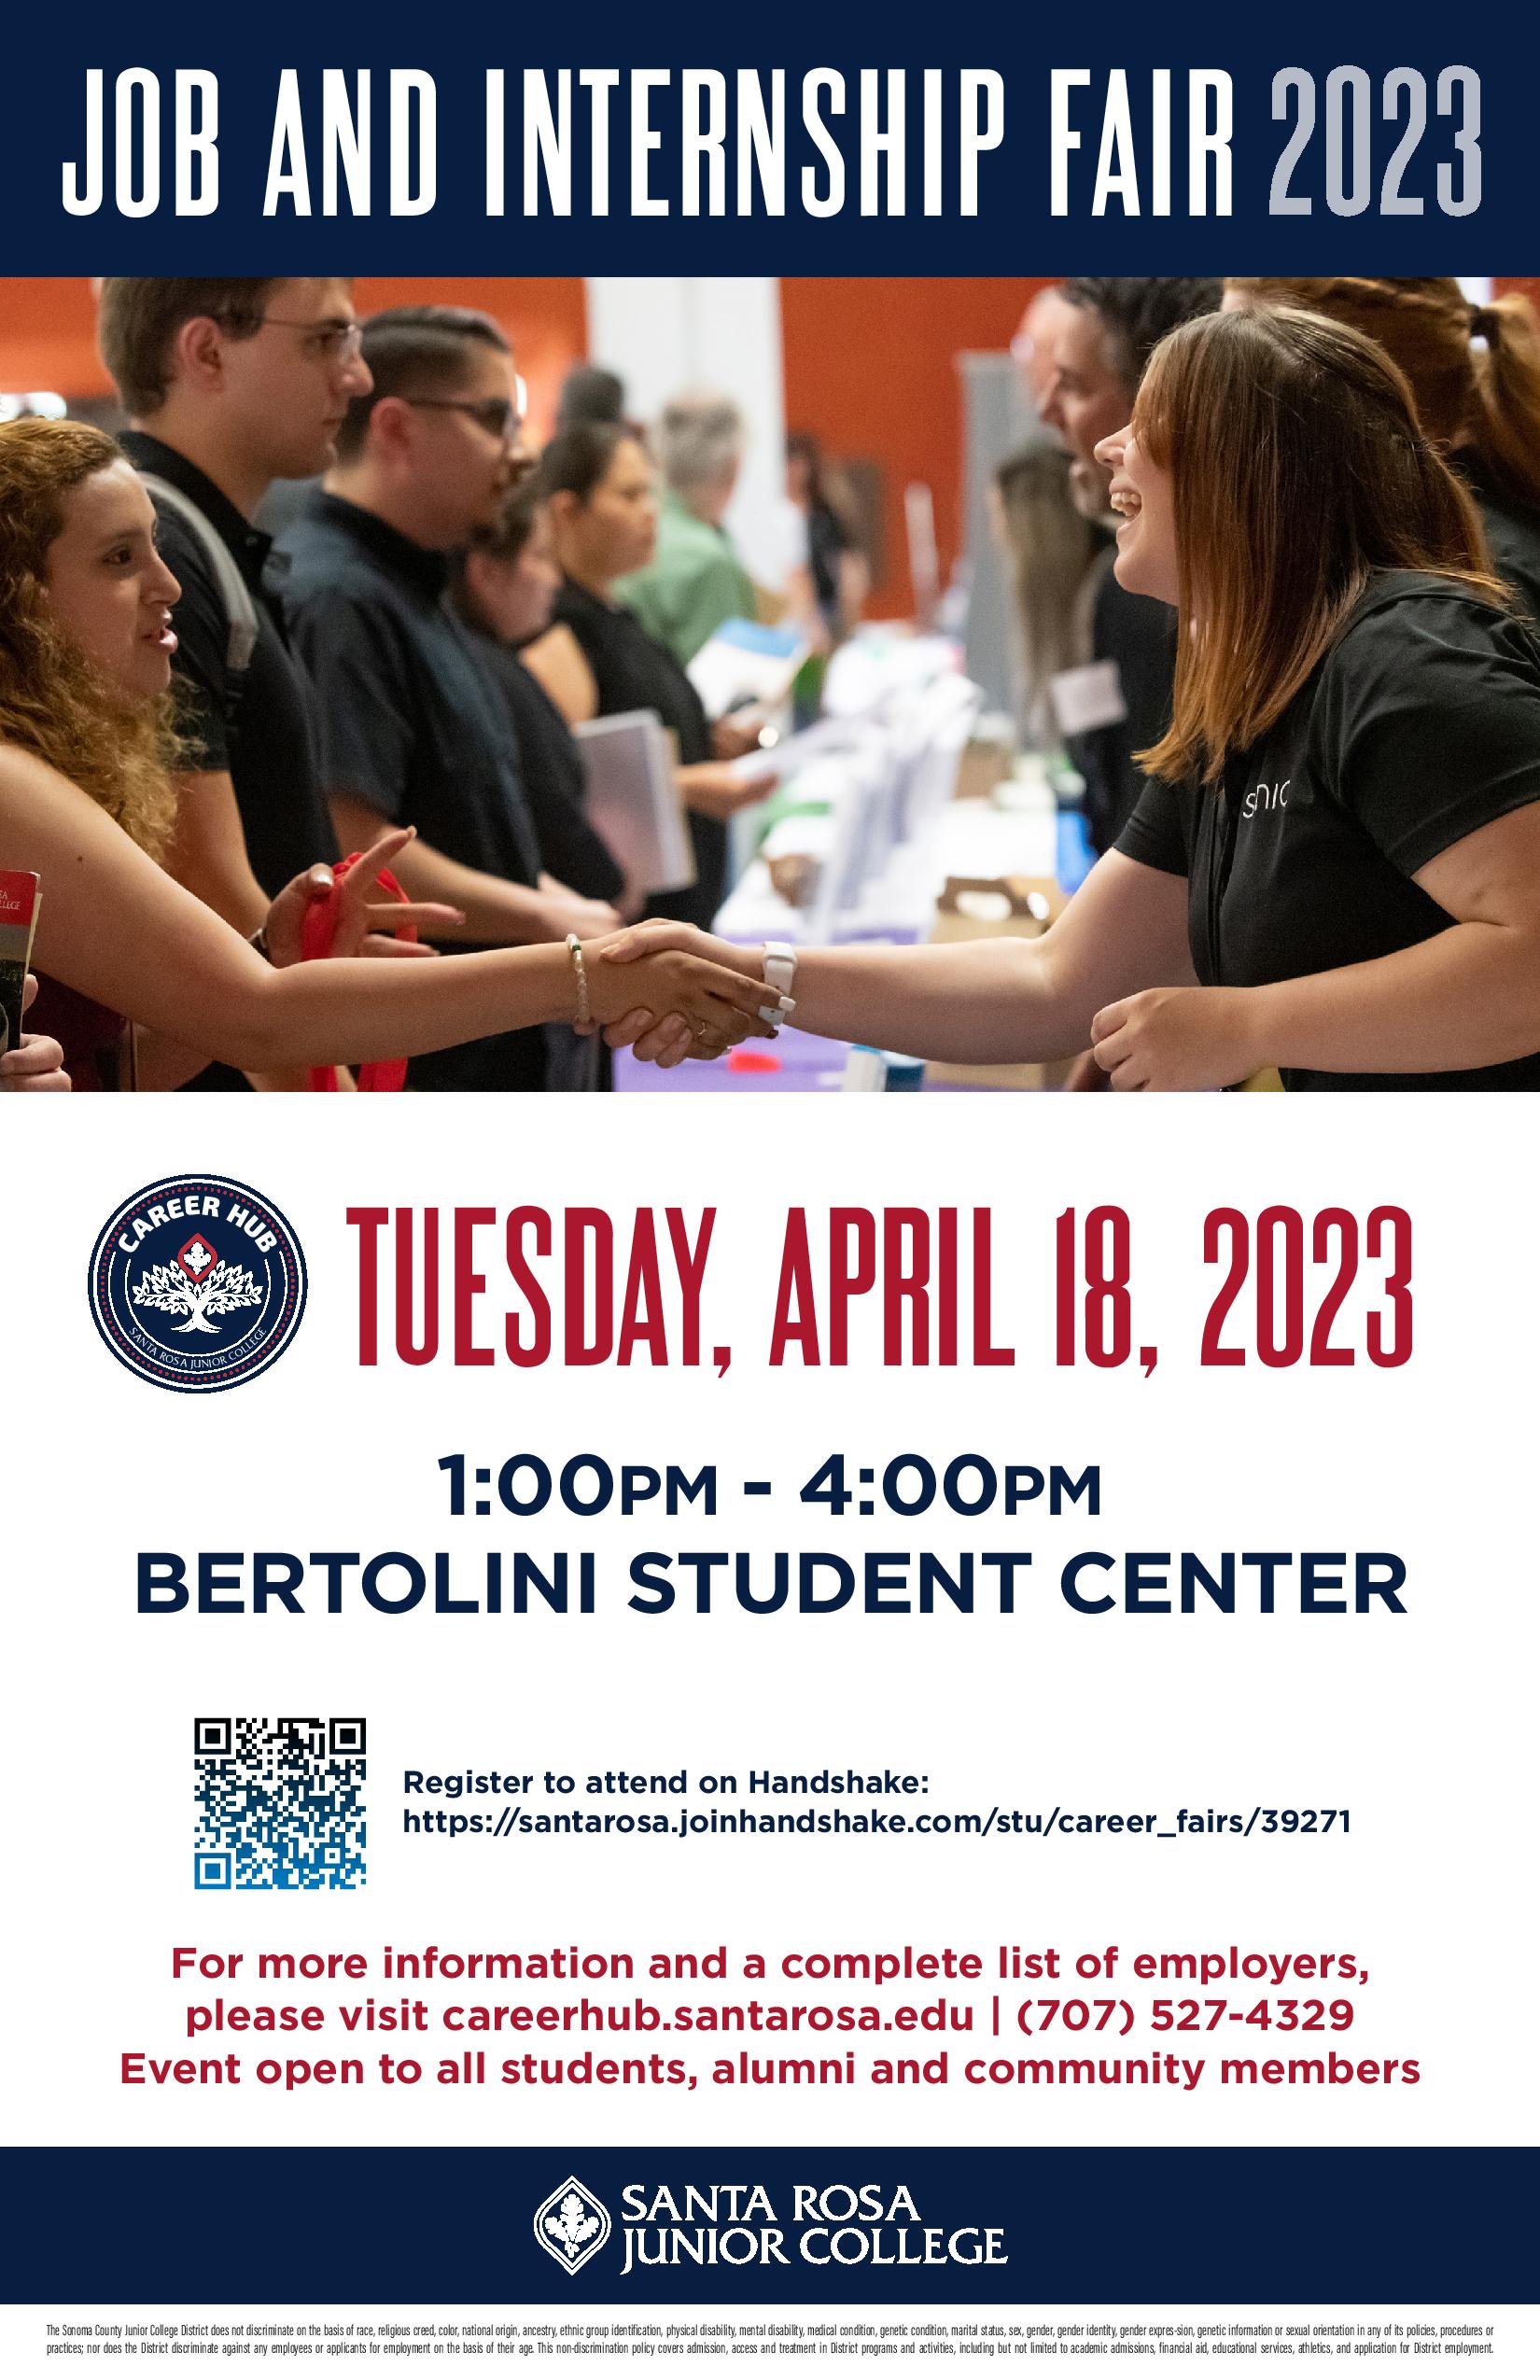 Job and Internship Fair 2023! TUESDAY, APRIL 18, 2023 1:00PM - 4:00PM BERTOLINI STUDENT CENTER For more information and a complete list of employers, please visit careerhub.santarosa.edu | (707) 527-4329 Event open to all students, alumni and community members. Register to attend on Handshake: https://santarosa.joinhandshake.com/stu/career_fairs/39271